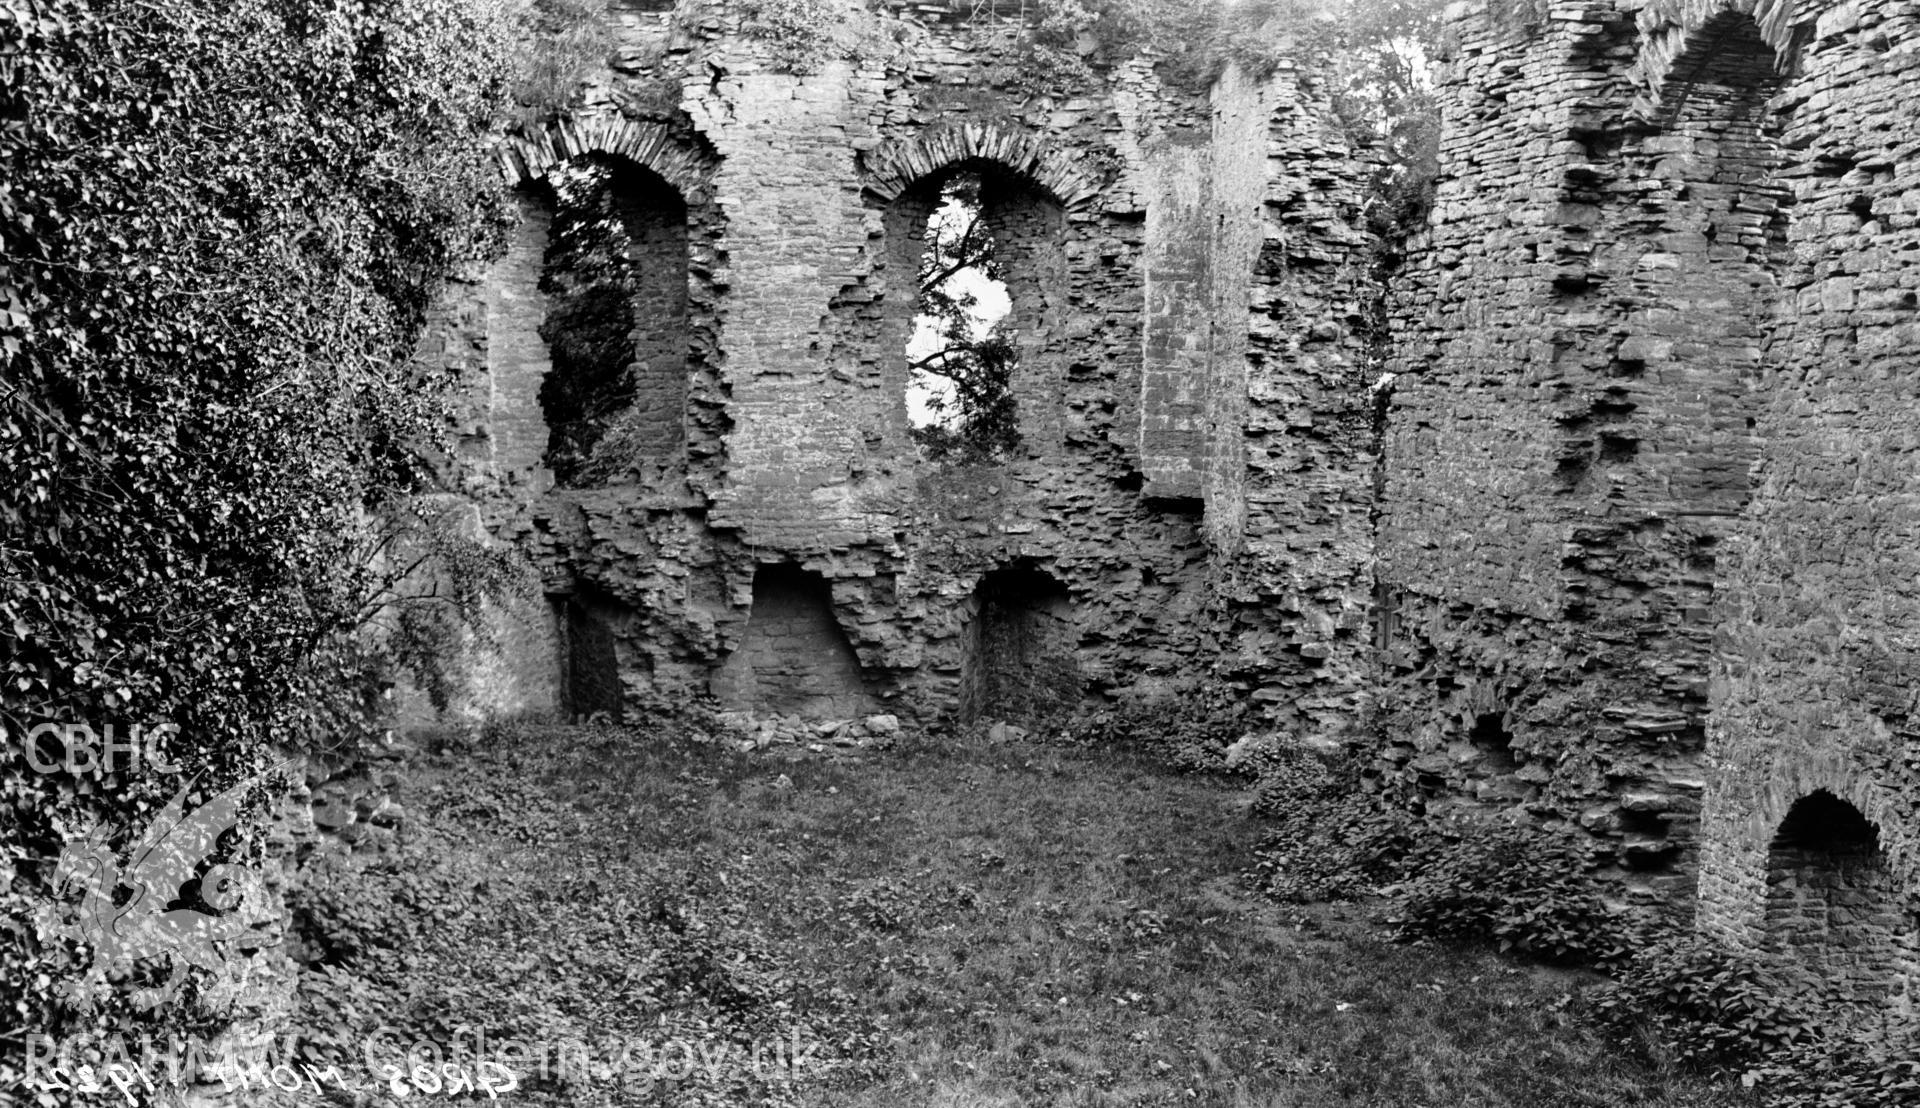 Black and white print of Grosmont Castle, produced by the Ministry of Works.